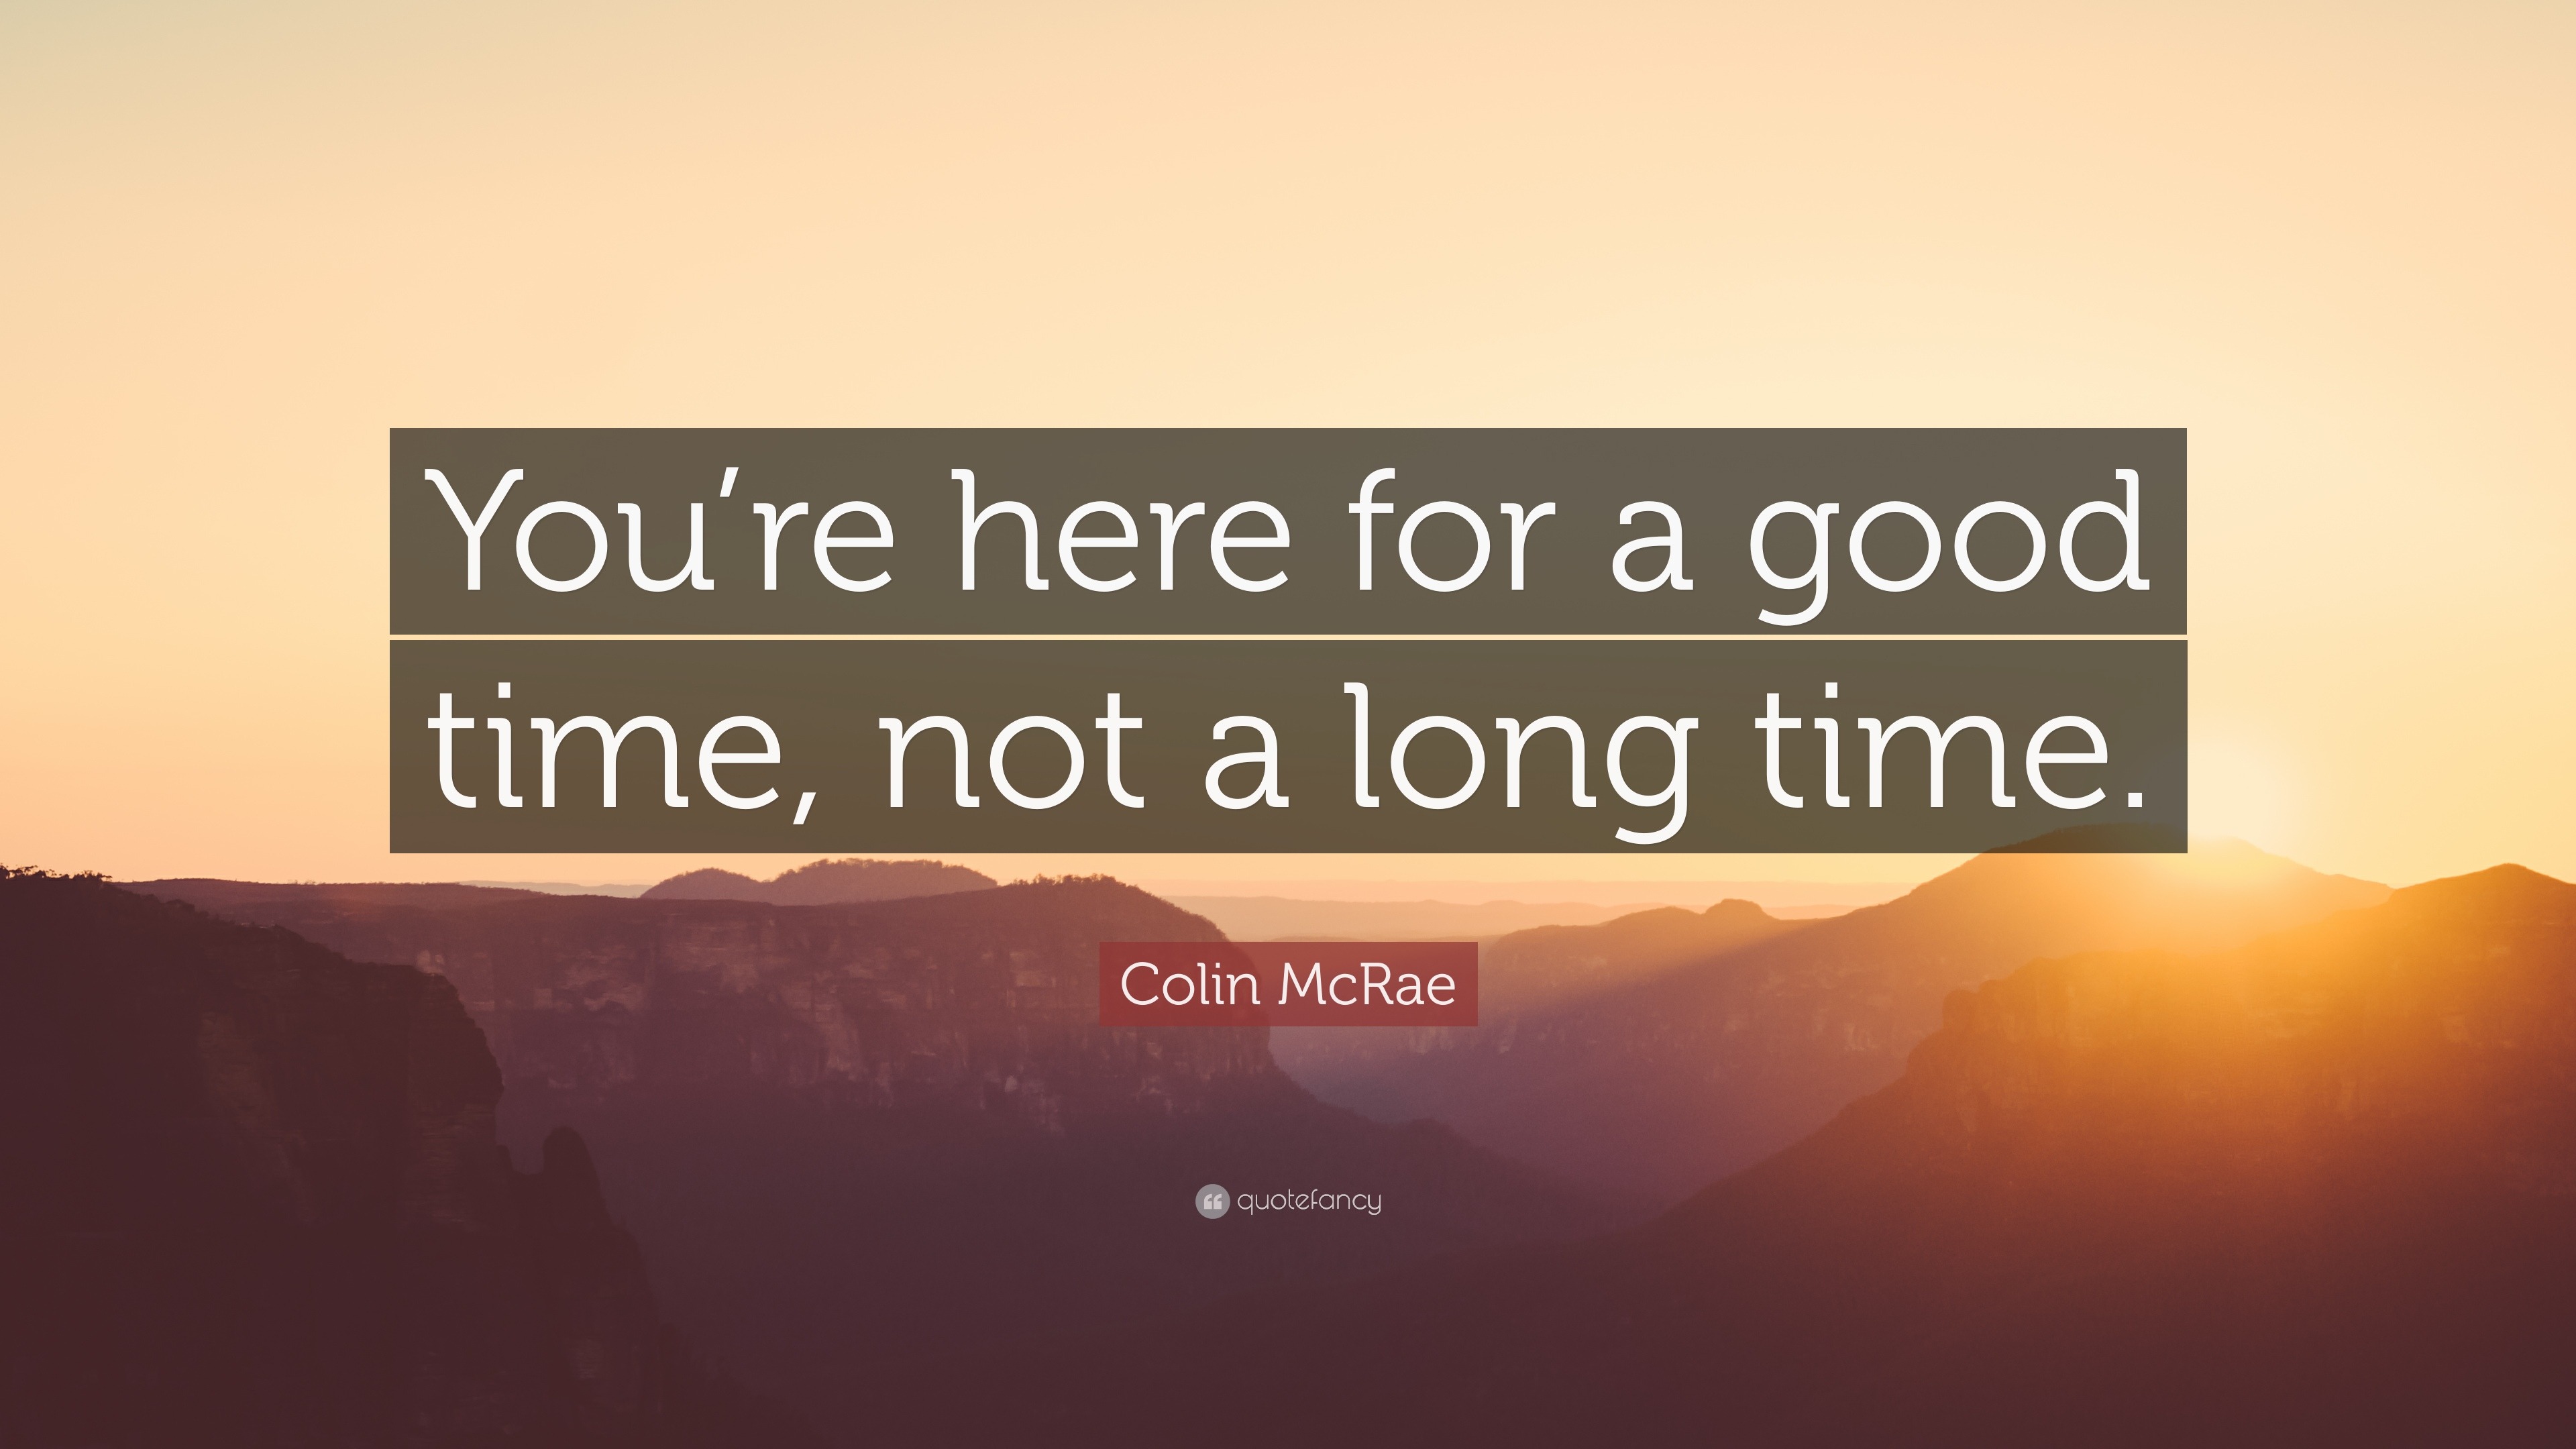 Colin McRae Quote: here for not a long time.”